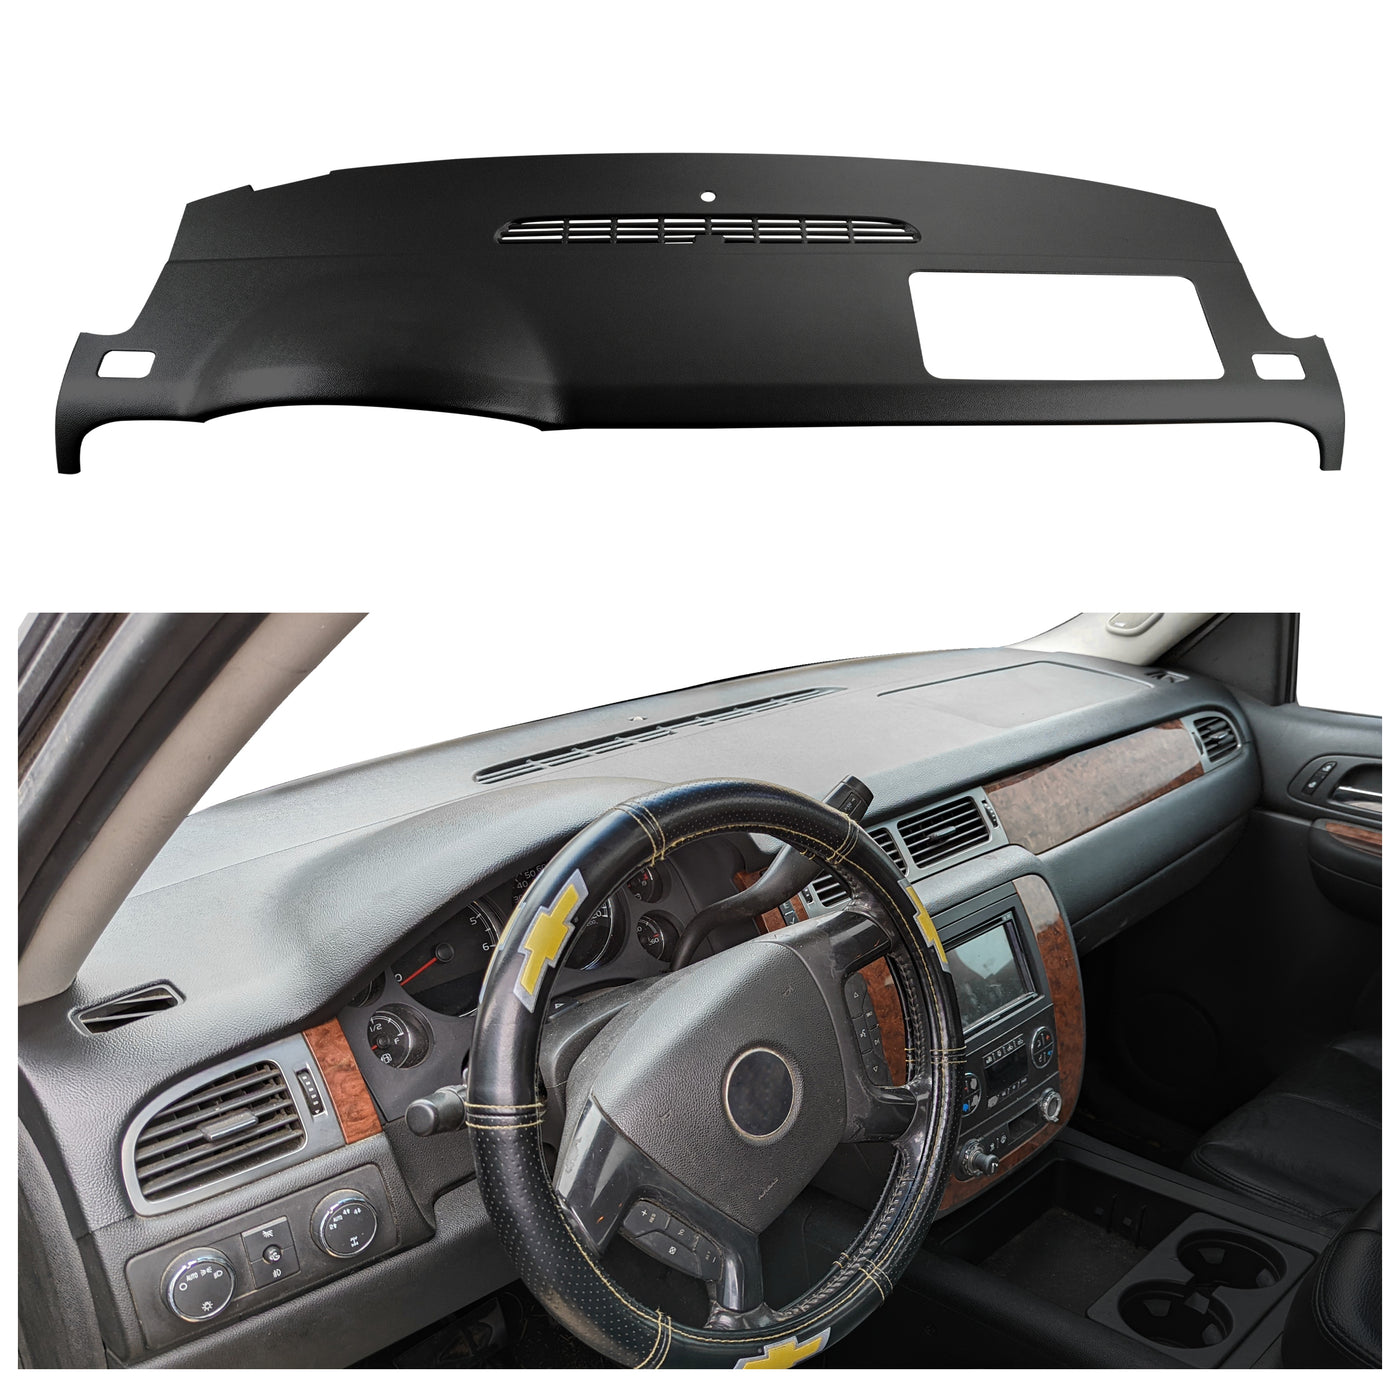 DashSkin Molded Dash Covers: The Ultimate Solution for Your 2007-2014 GM Truck's Cracked Dash!